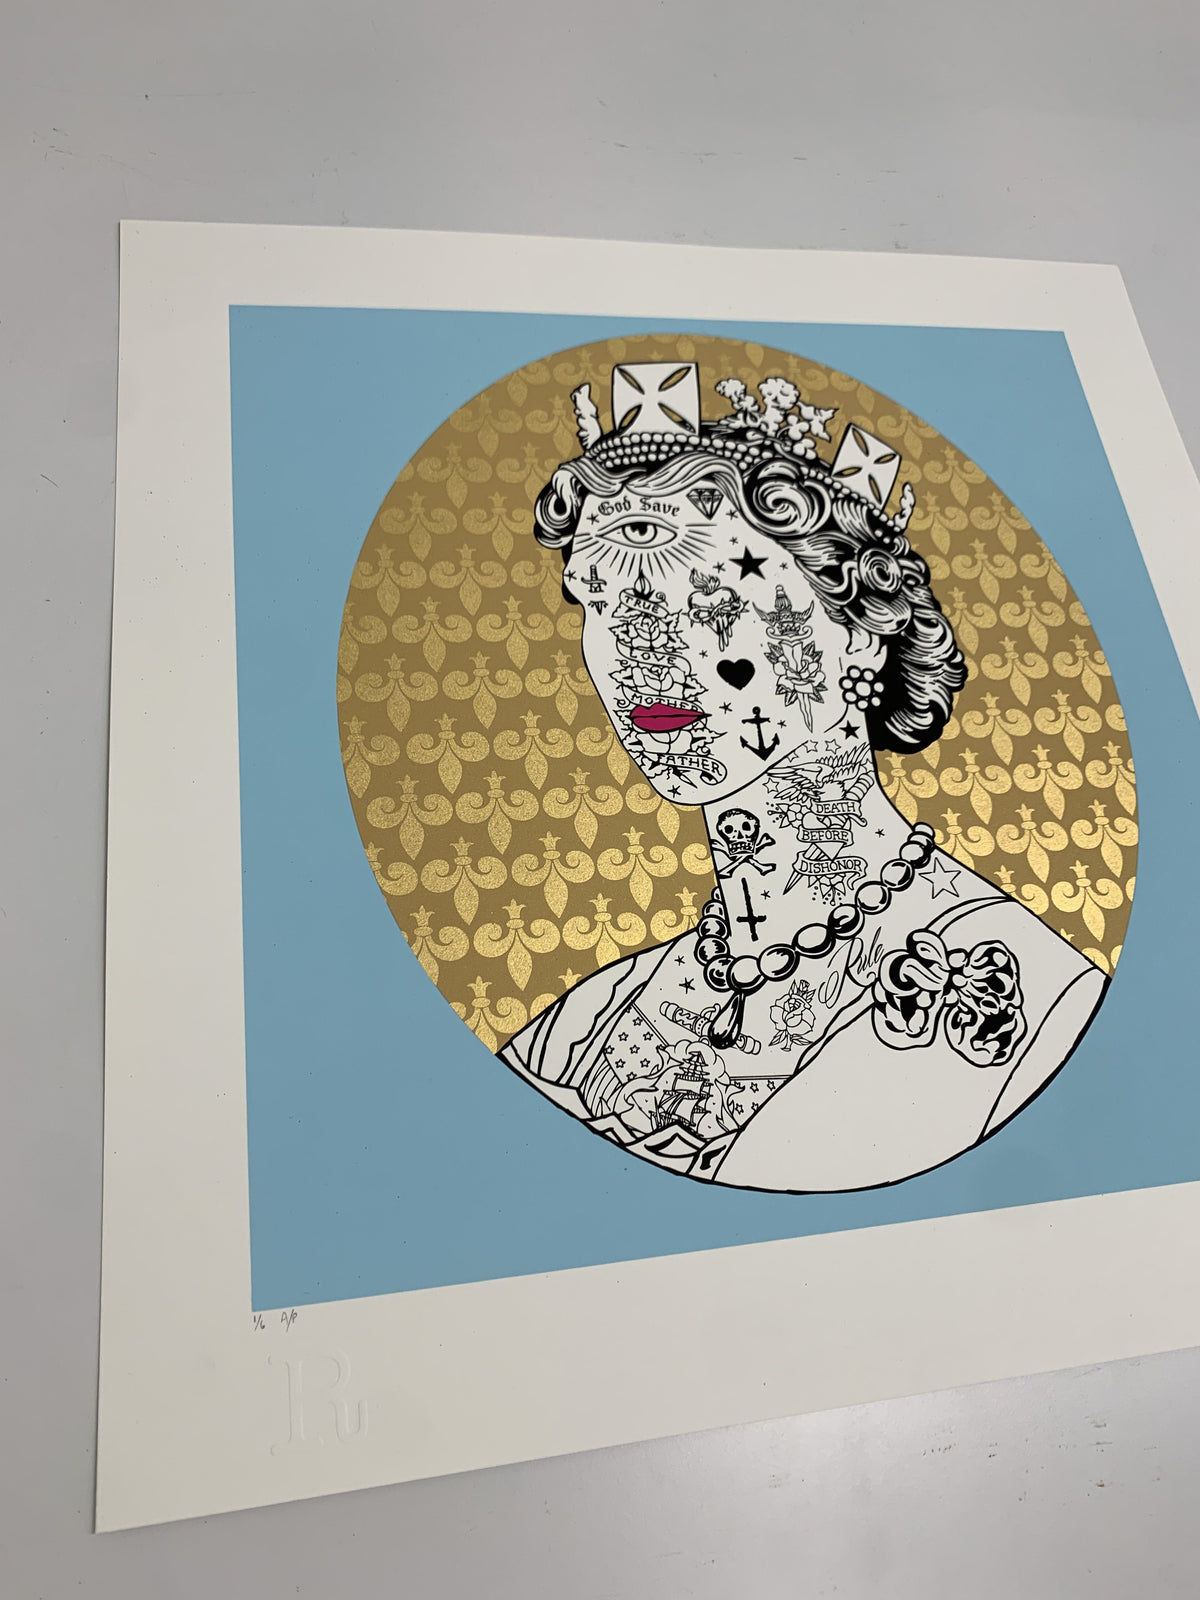 Liz Ink Blue And 24CT Gold Halo (2014)